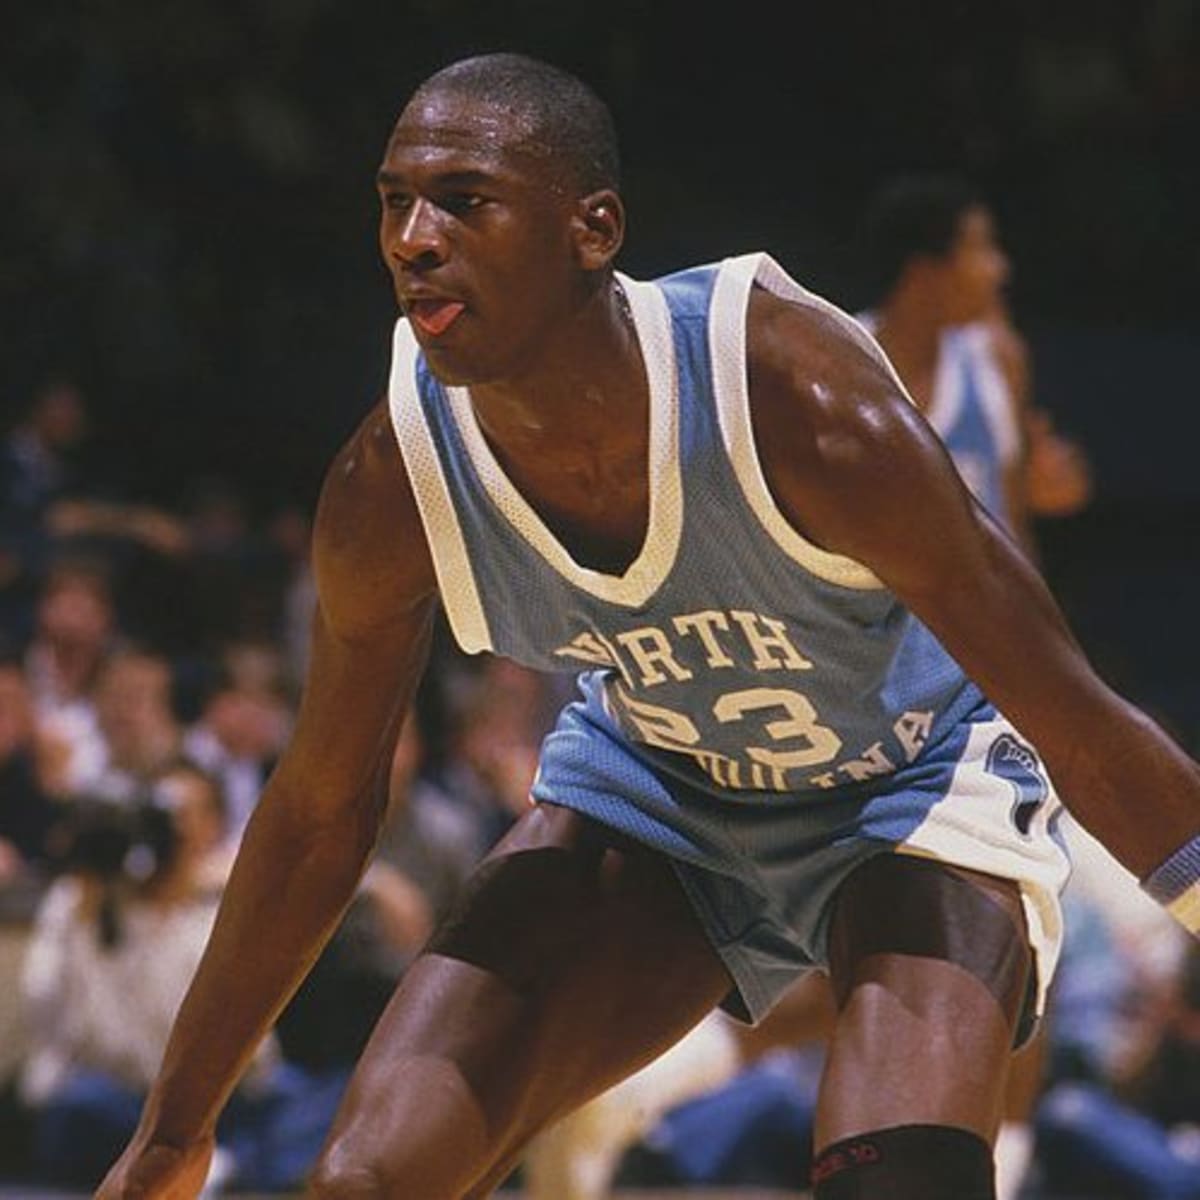 James Worthy On College Michael Jordan: I Was Better Than Michael Jordan, For About 3 Weeks